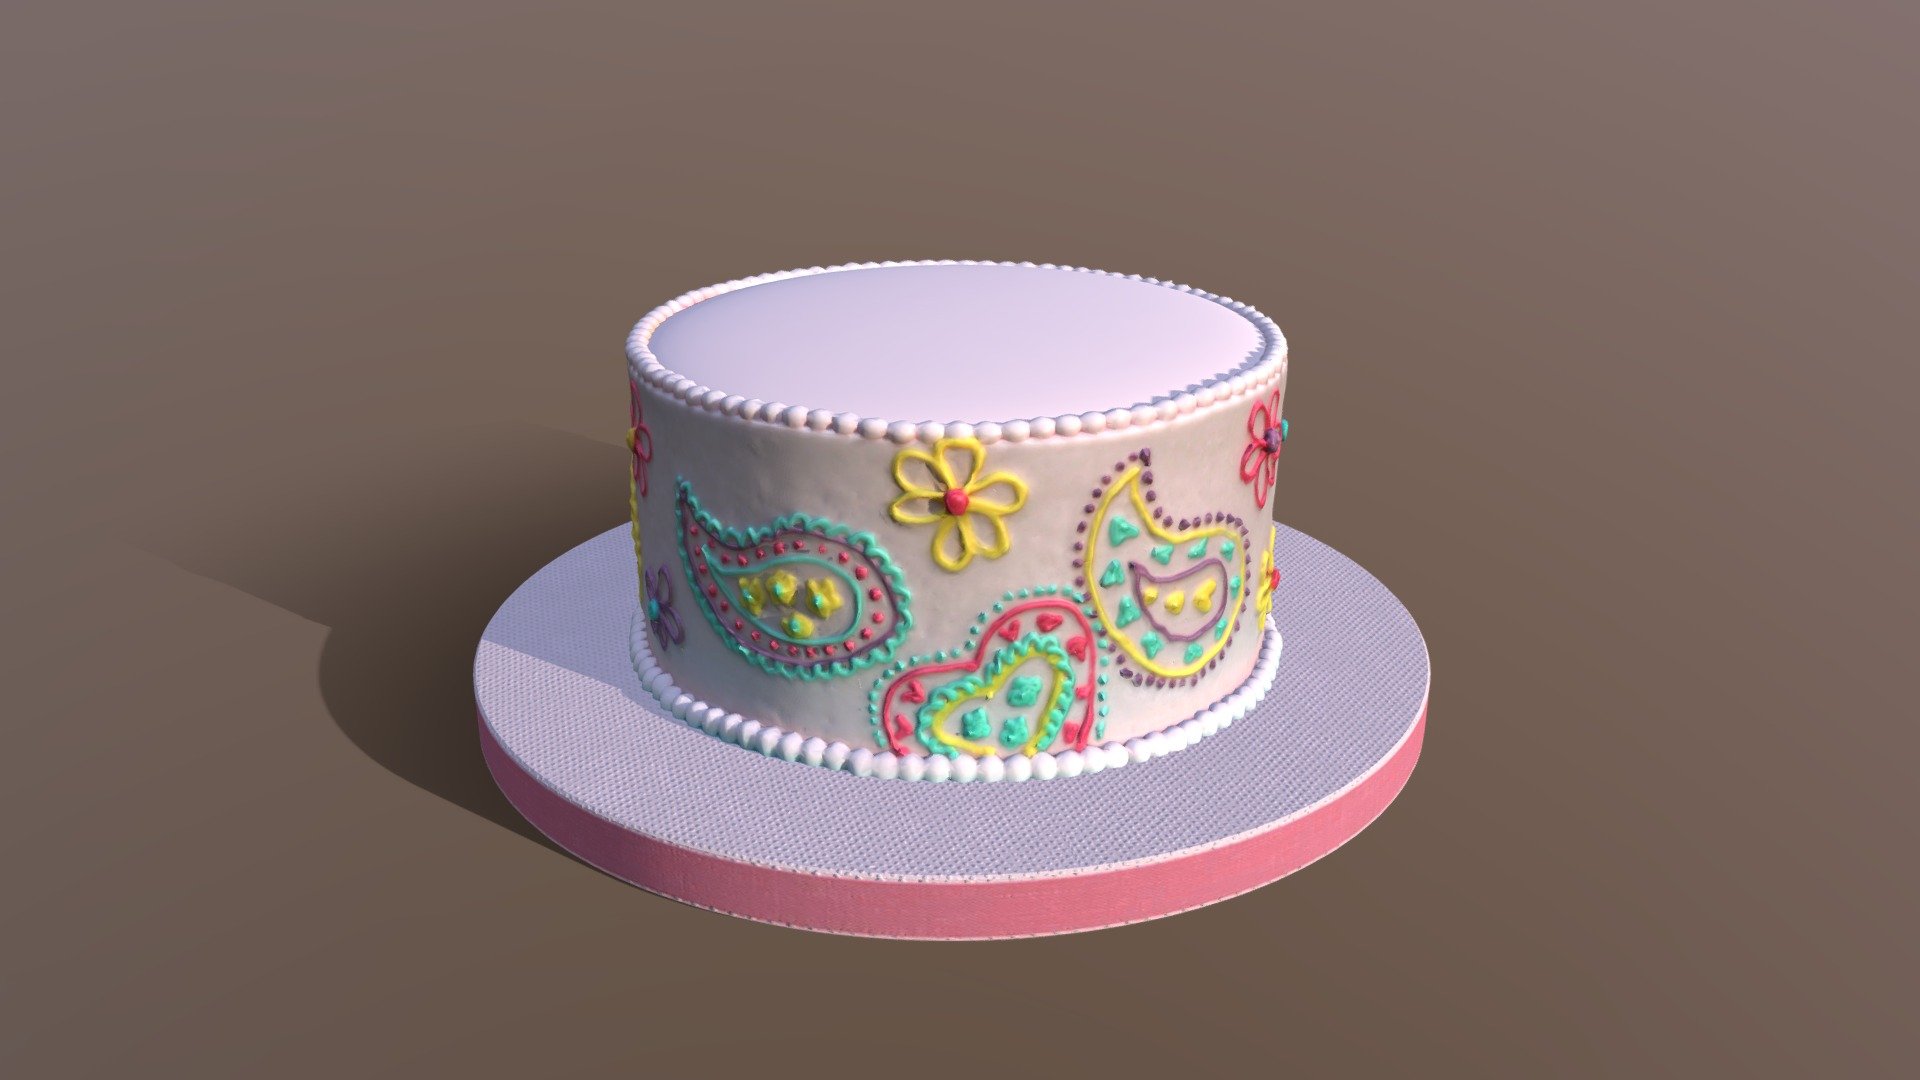 This Ninja Head Cake model was created using photogrammetry which is made by CAKESBURG Premium Cake Shop in the UK. You can purchase real cake from this link: https://cakesburg.co.uk/products/unicorne-cake?_pos=11&amp;_sid=af4af2ff3&amp;_ss=r

Textures 4096*4096px PBR photoscan-based materials Base Color, Normal Map, Roughness) - Paisley Cake - Buy Royalty Free 3D model by Cakesburg Premium 3D Cake Shop (@Viscom_Cakesburg) 3d model